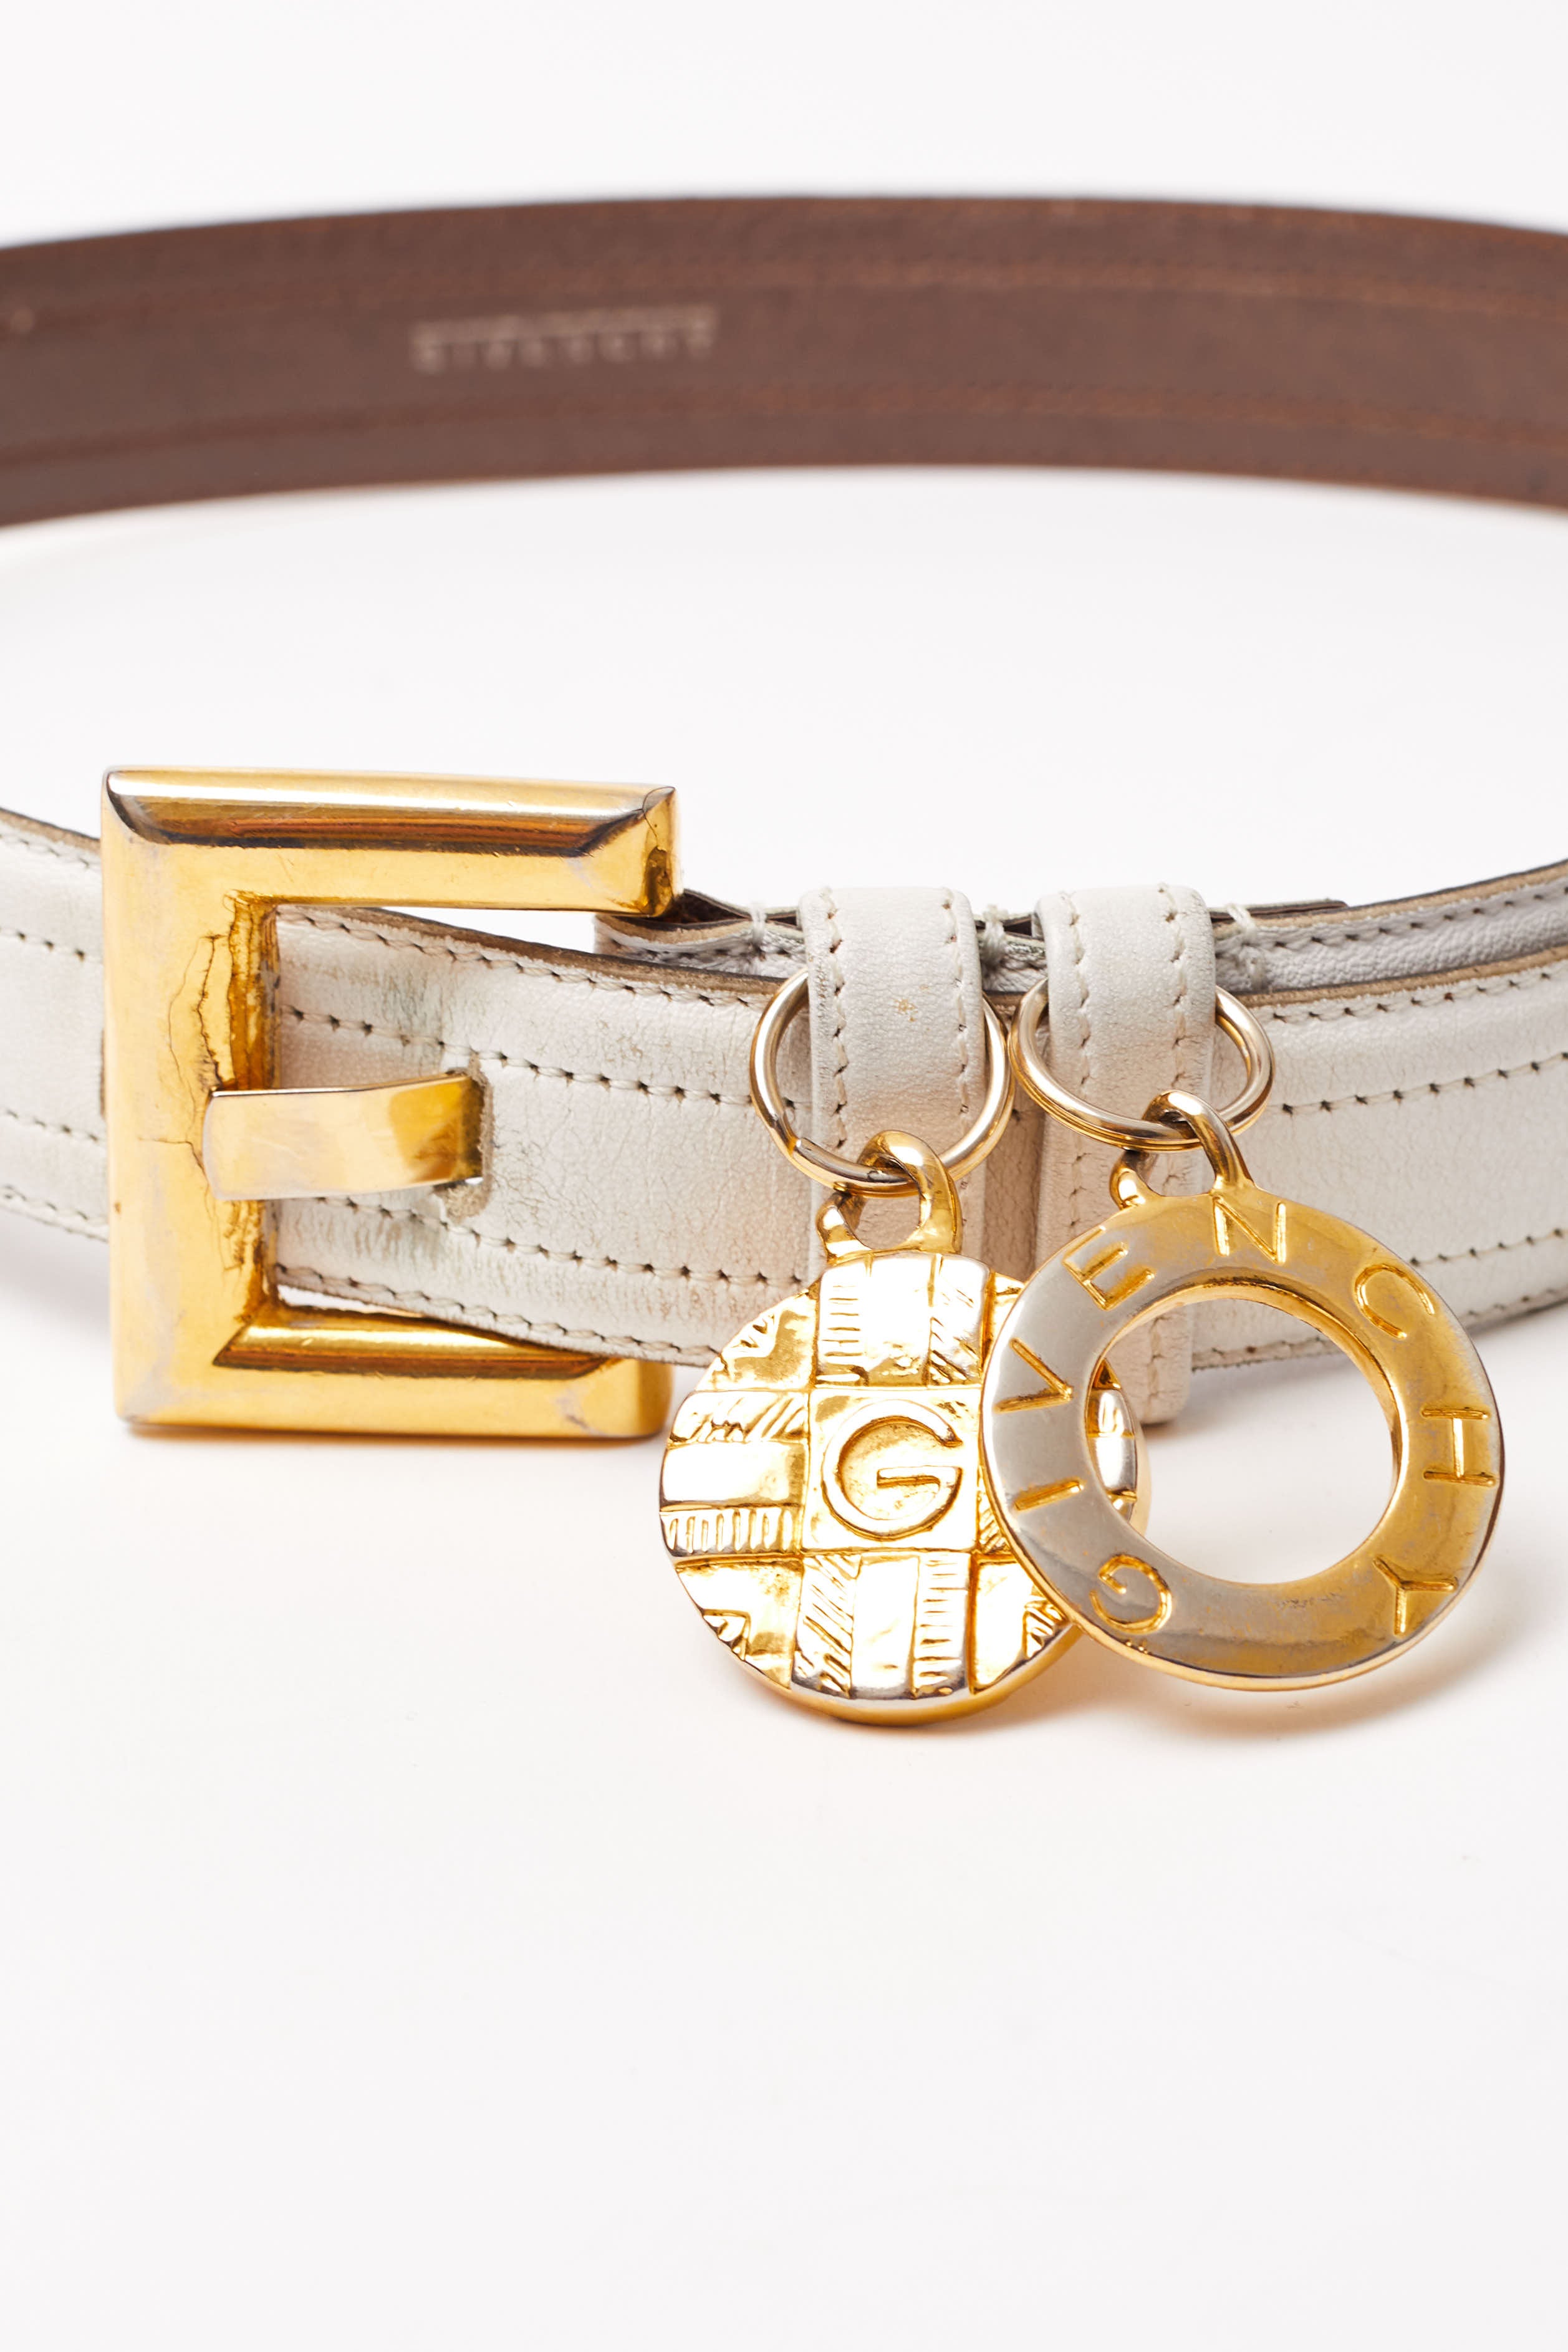 Givenchy <br> 80's leather belt with dangling logo medallions